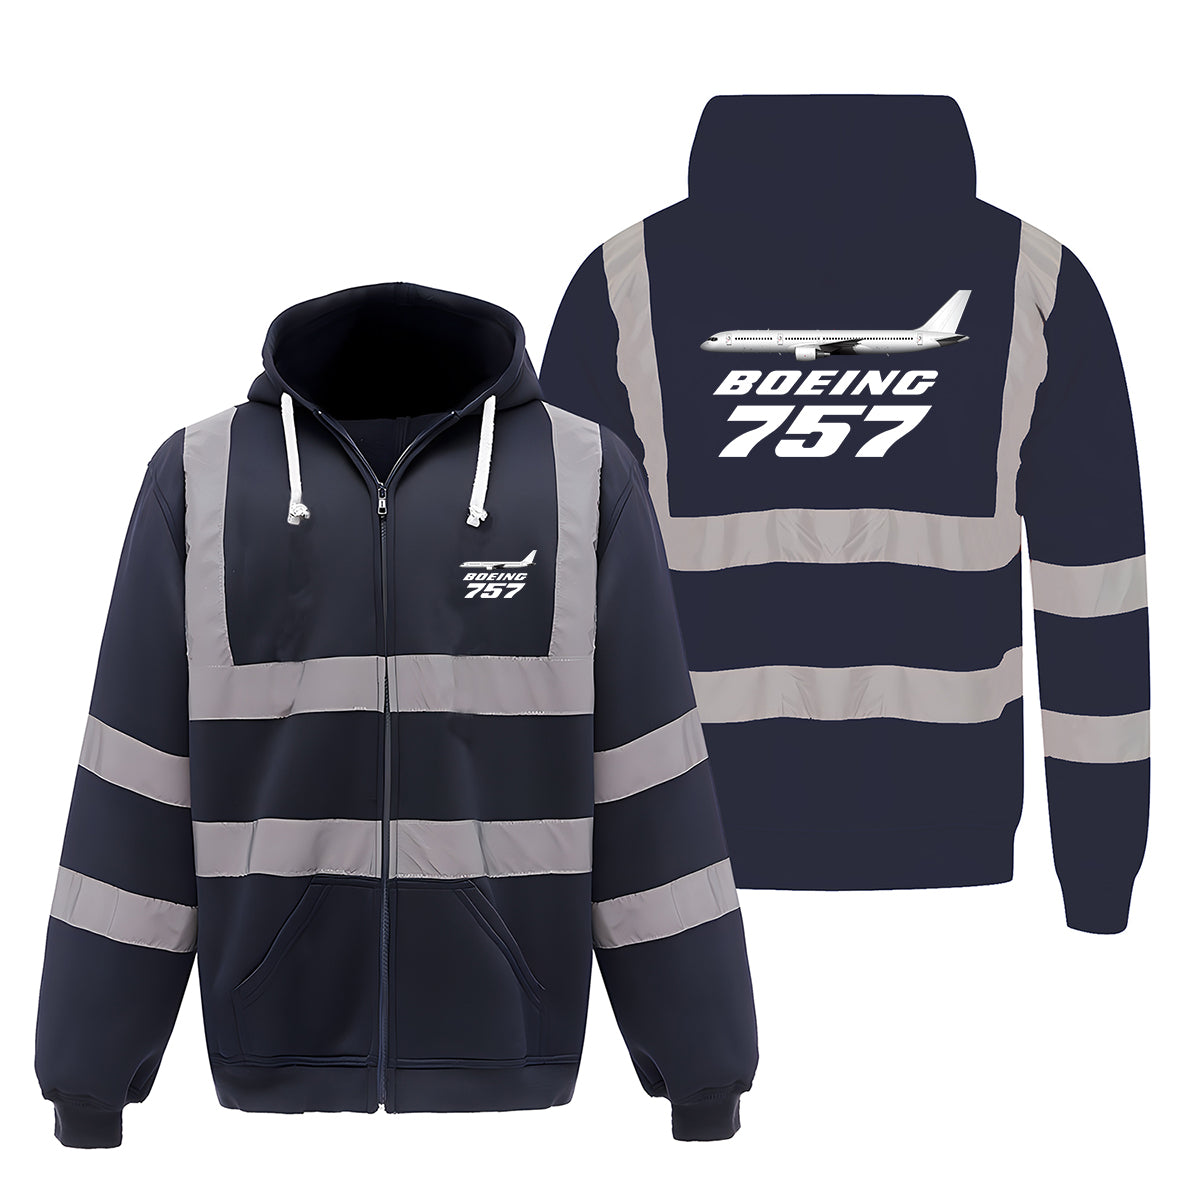 The Boeing 757 Designed Reflective Zipped Hoodies